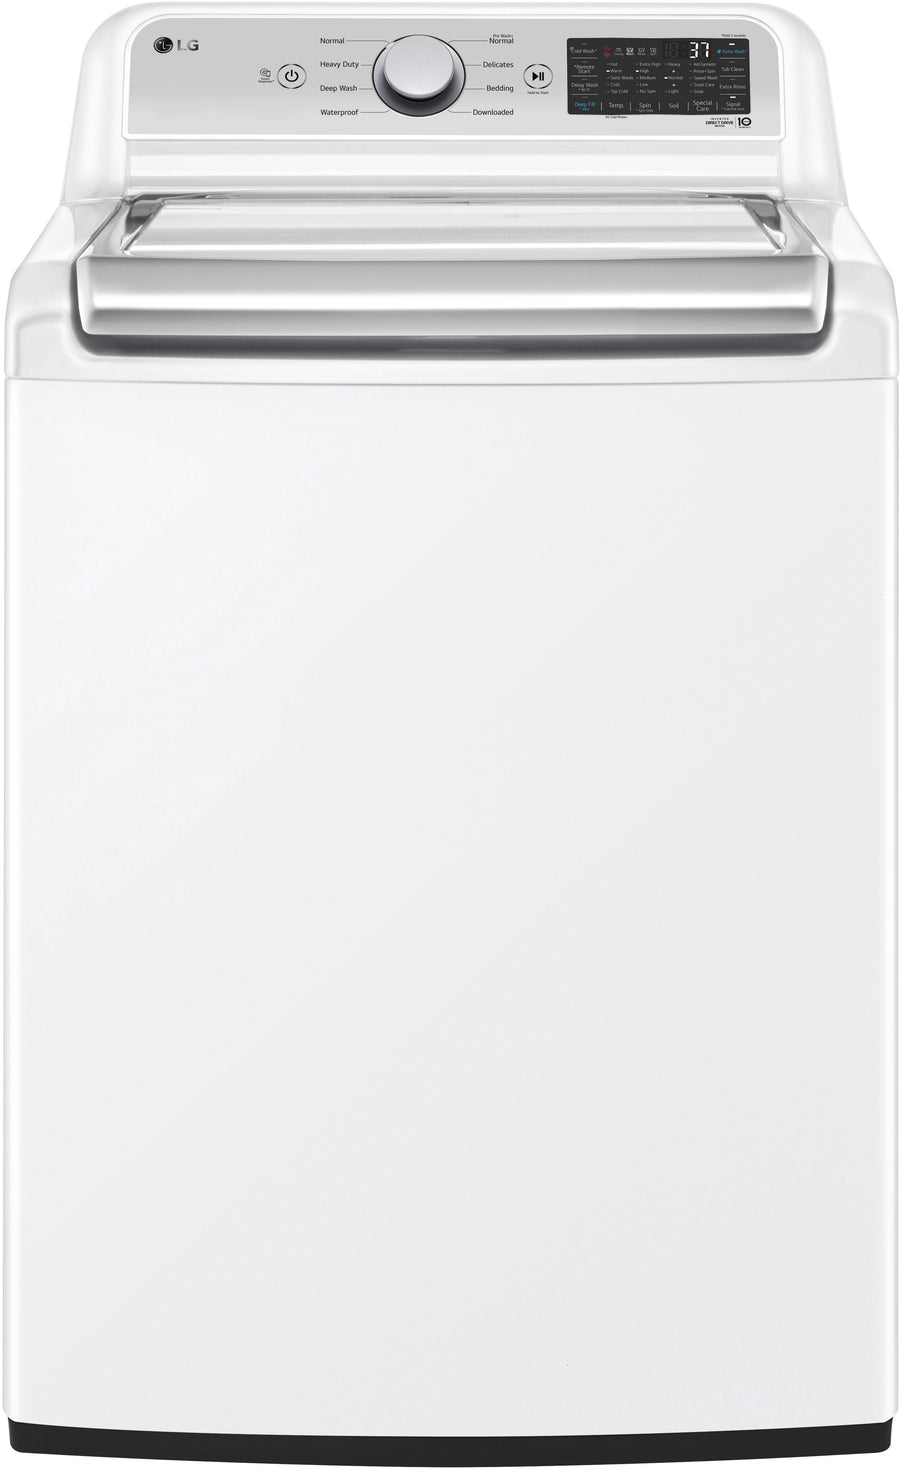 LG - 5.3 Cu. Ft. High-Efficiency Smart Top Load Washer with 4-Way Agitator and TurboWash3D - White_0